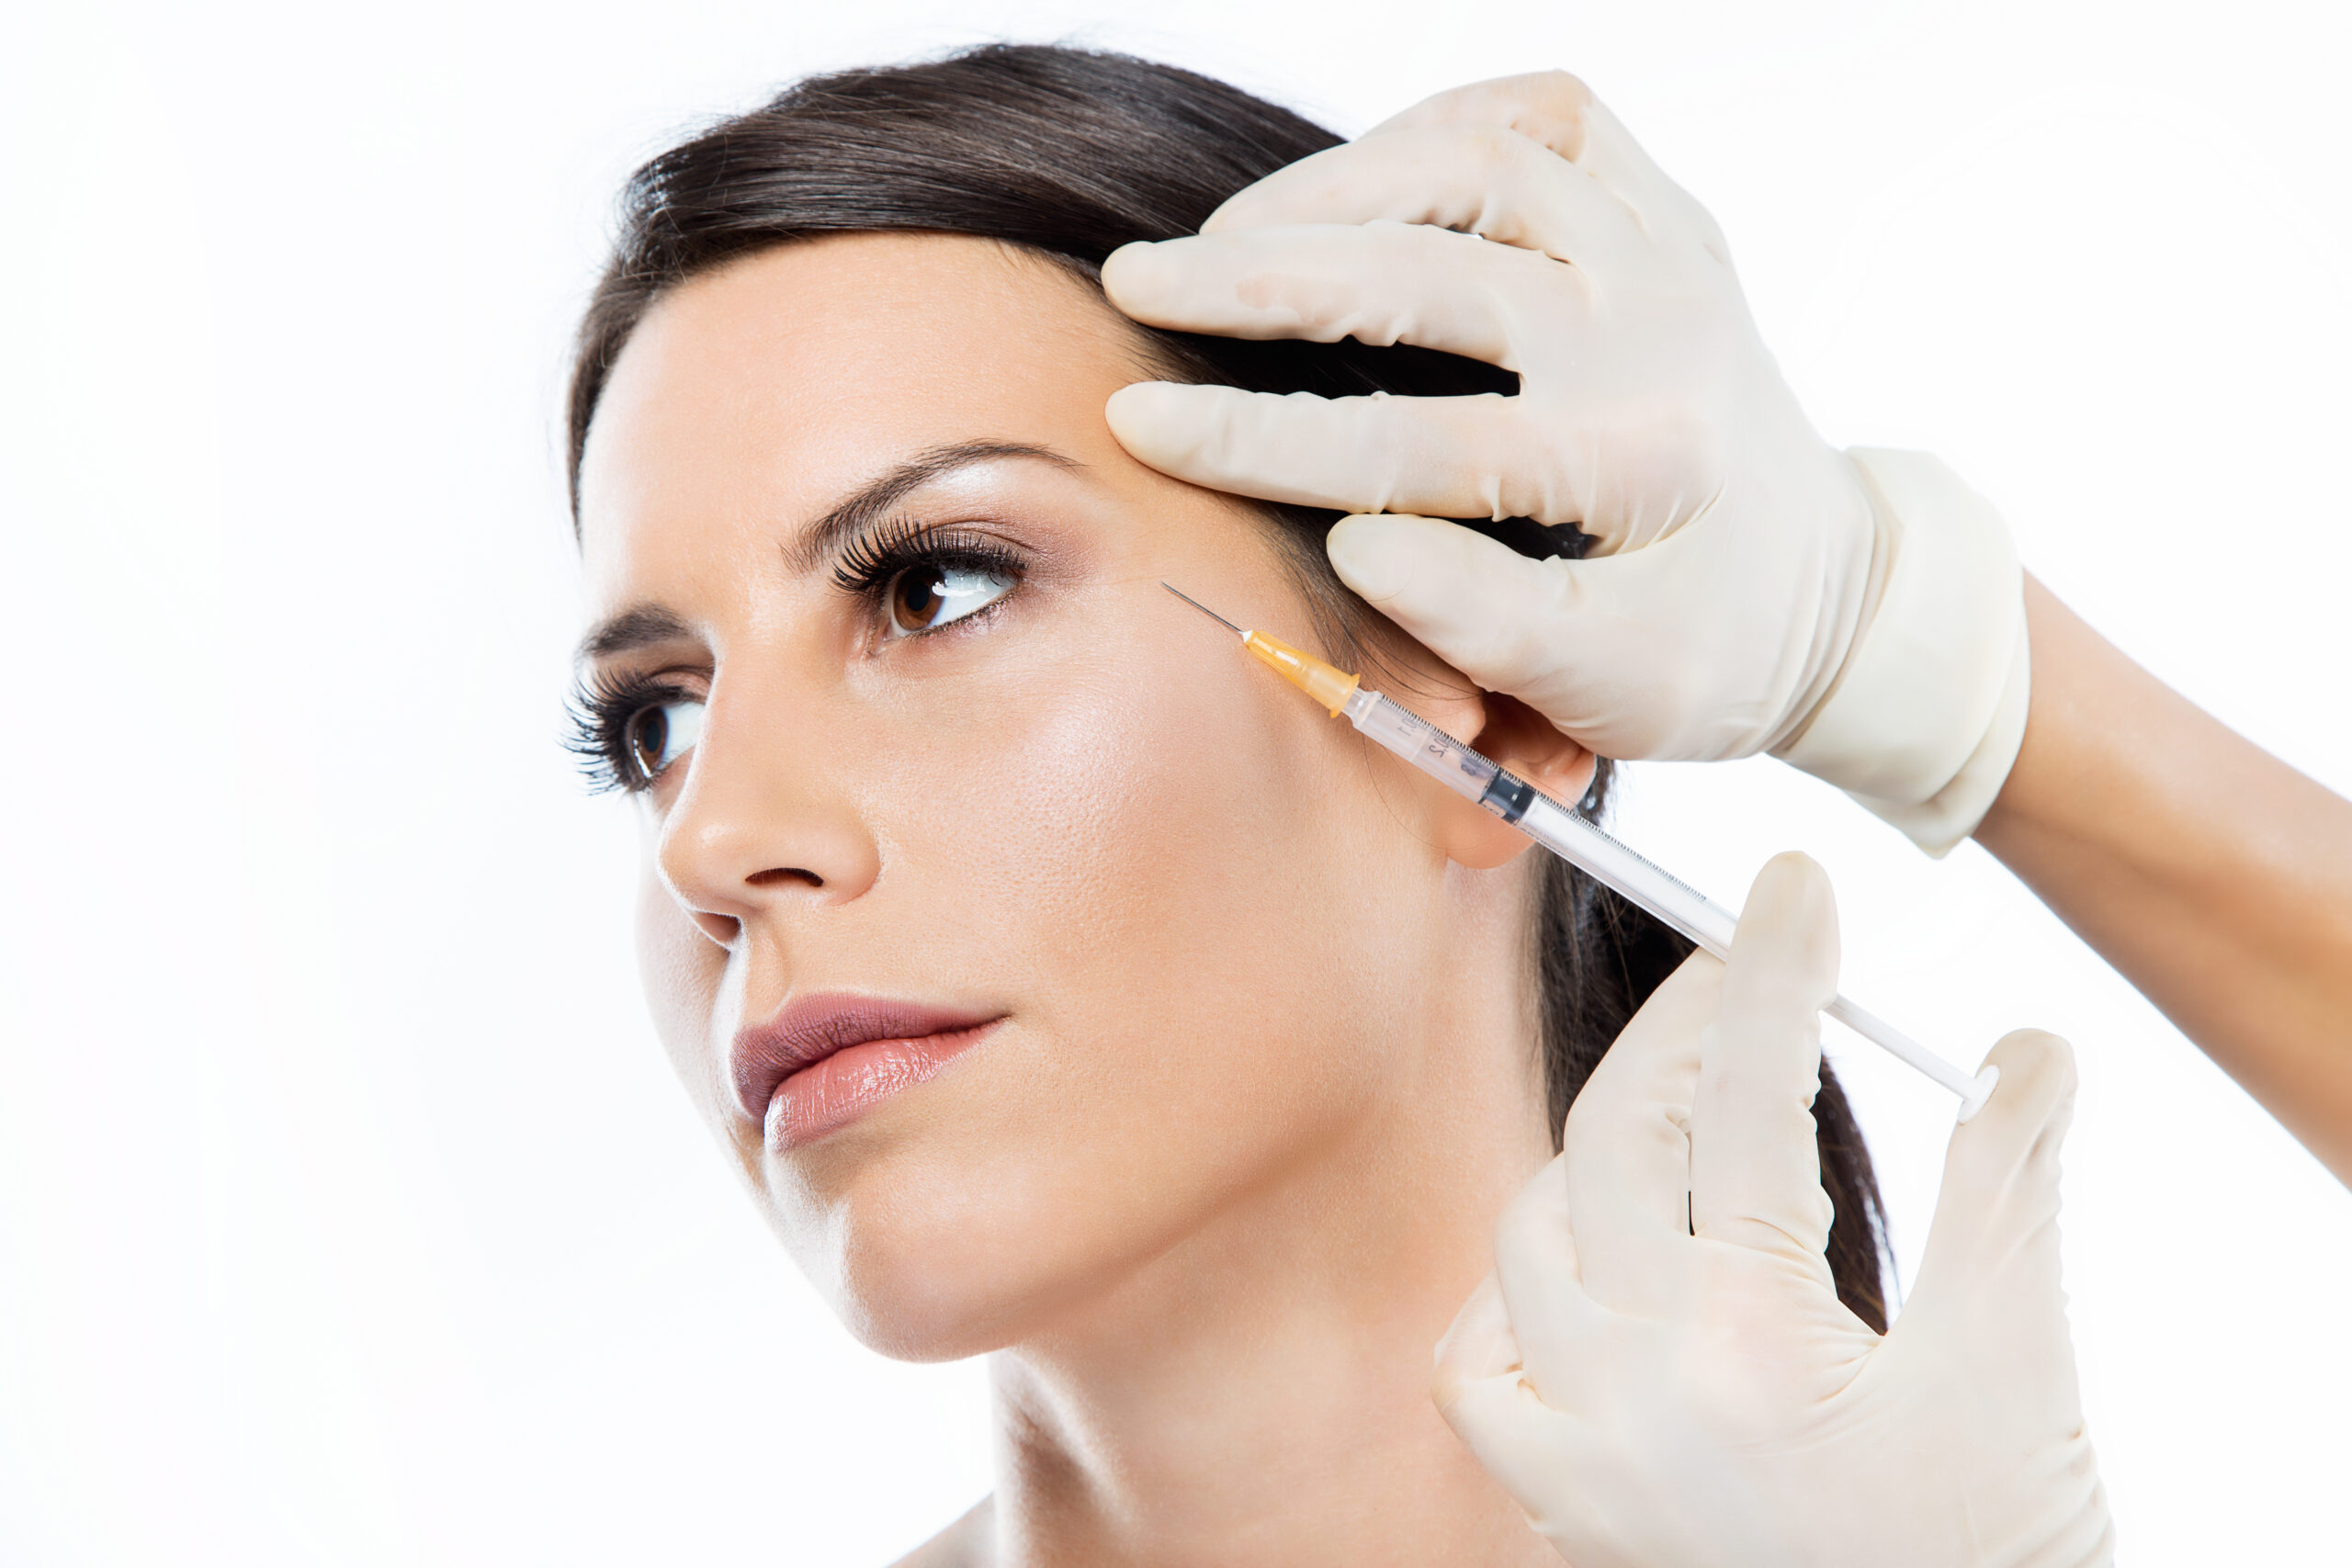 Facial Esthetics; young woman getting botox cosmetic injection in her face